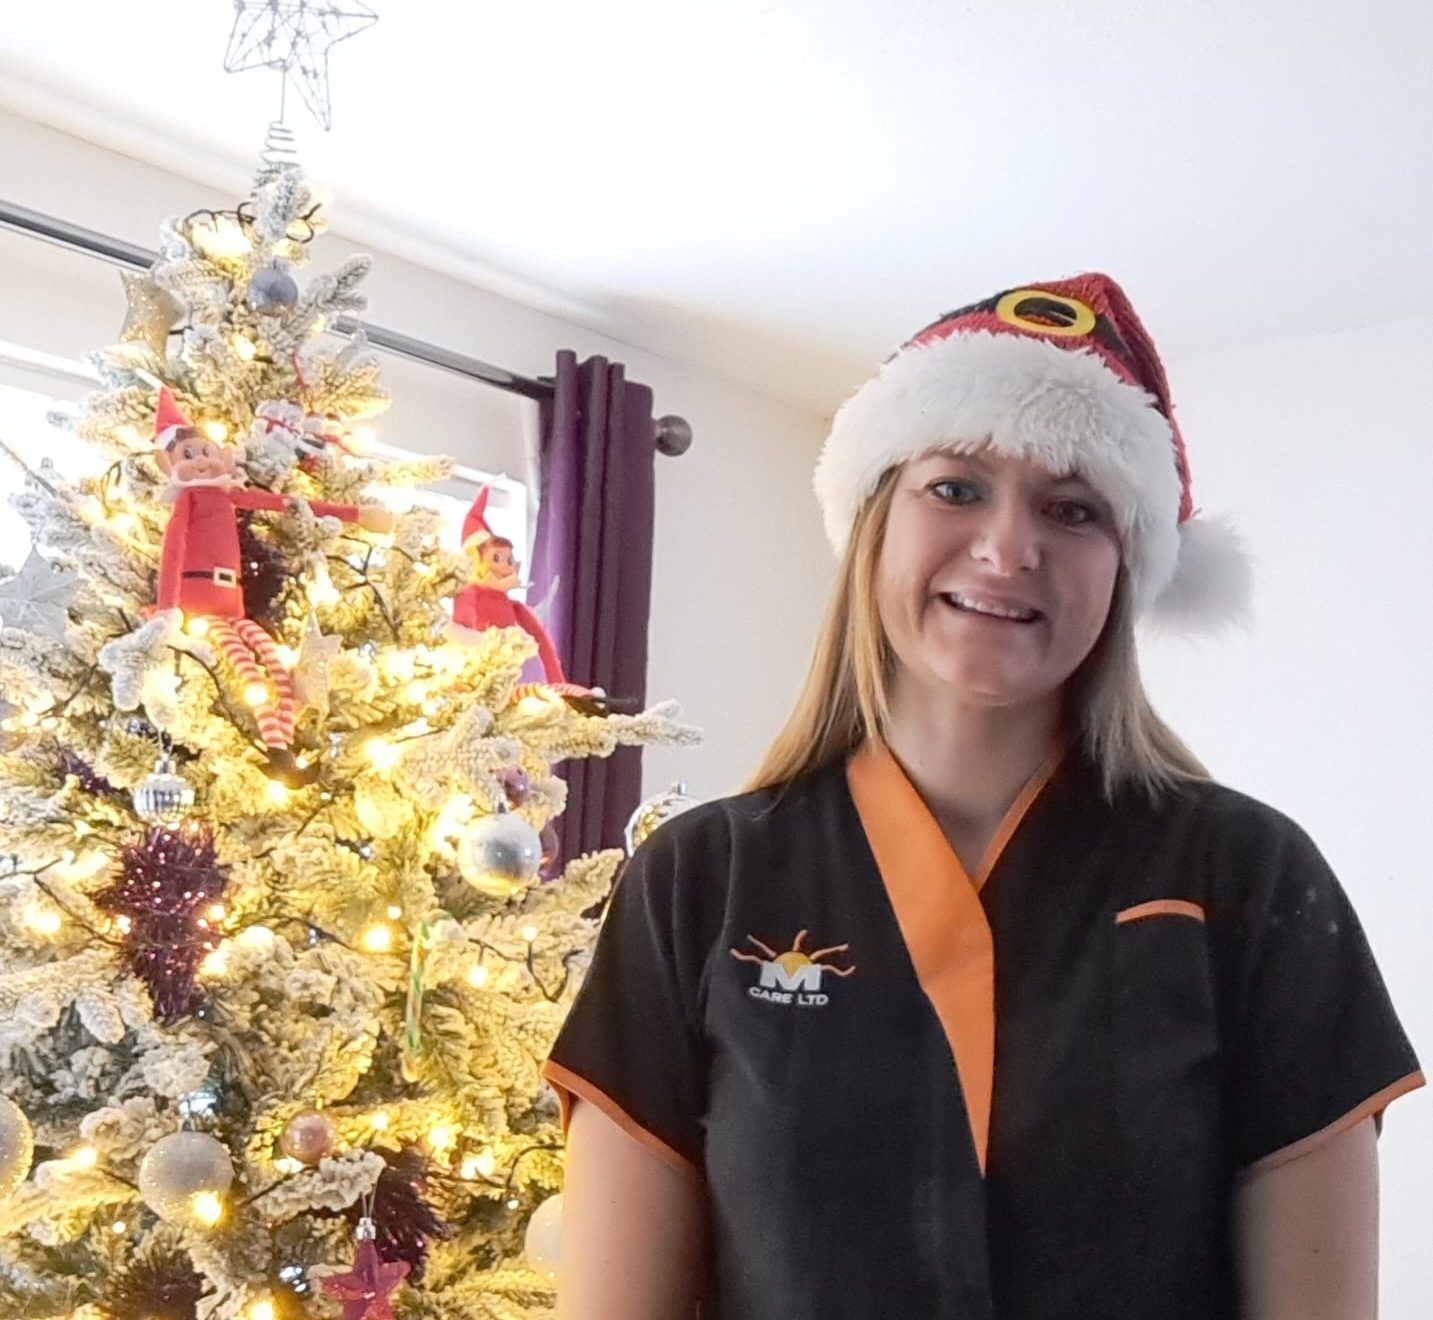 The Christmas Shift – What it’s like working in care over the Christmas period